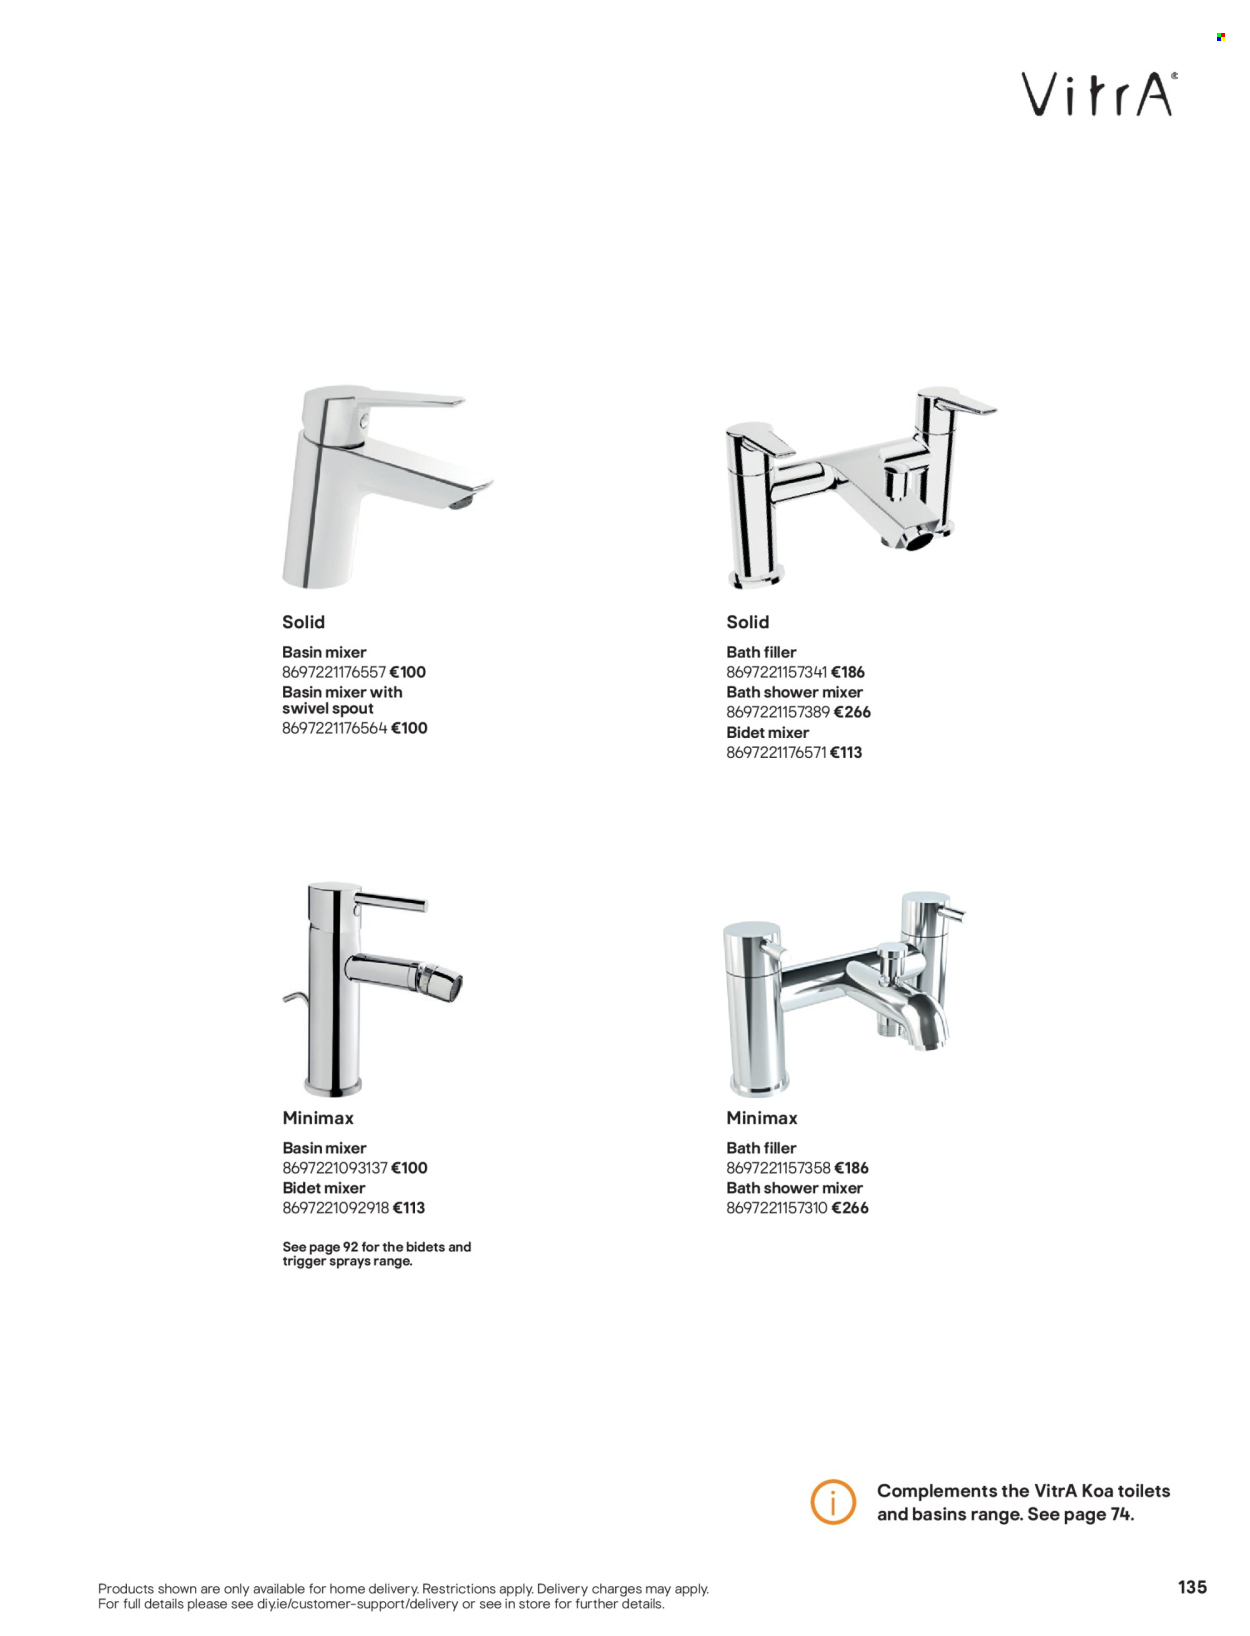 thumbnail - B&Q offer  - Sales products - toilet, shower mixer, basin mixer. Page 135.